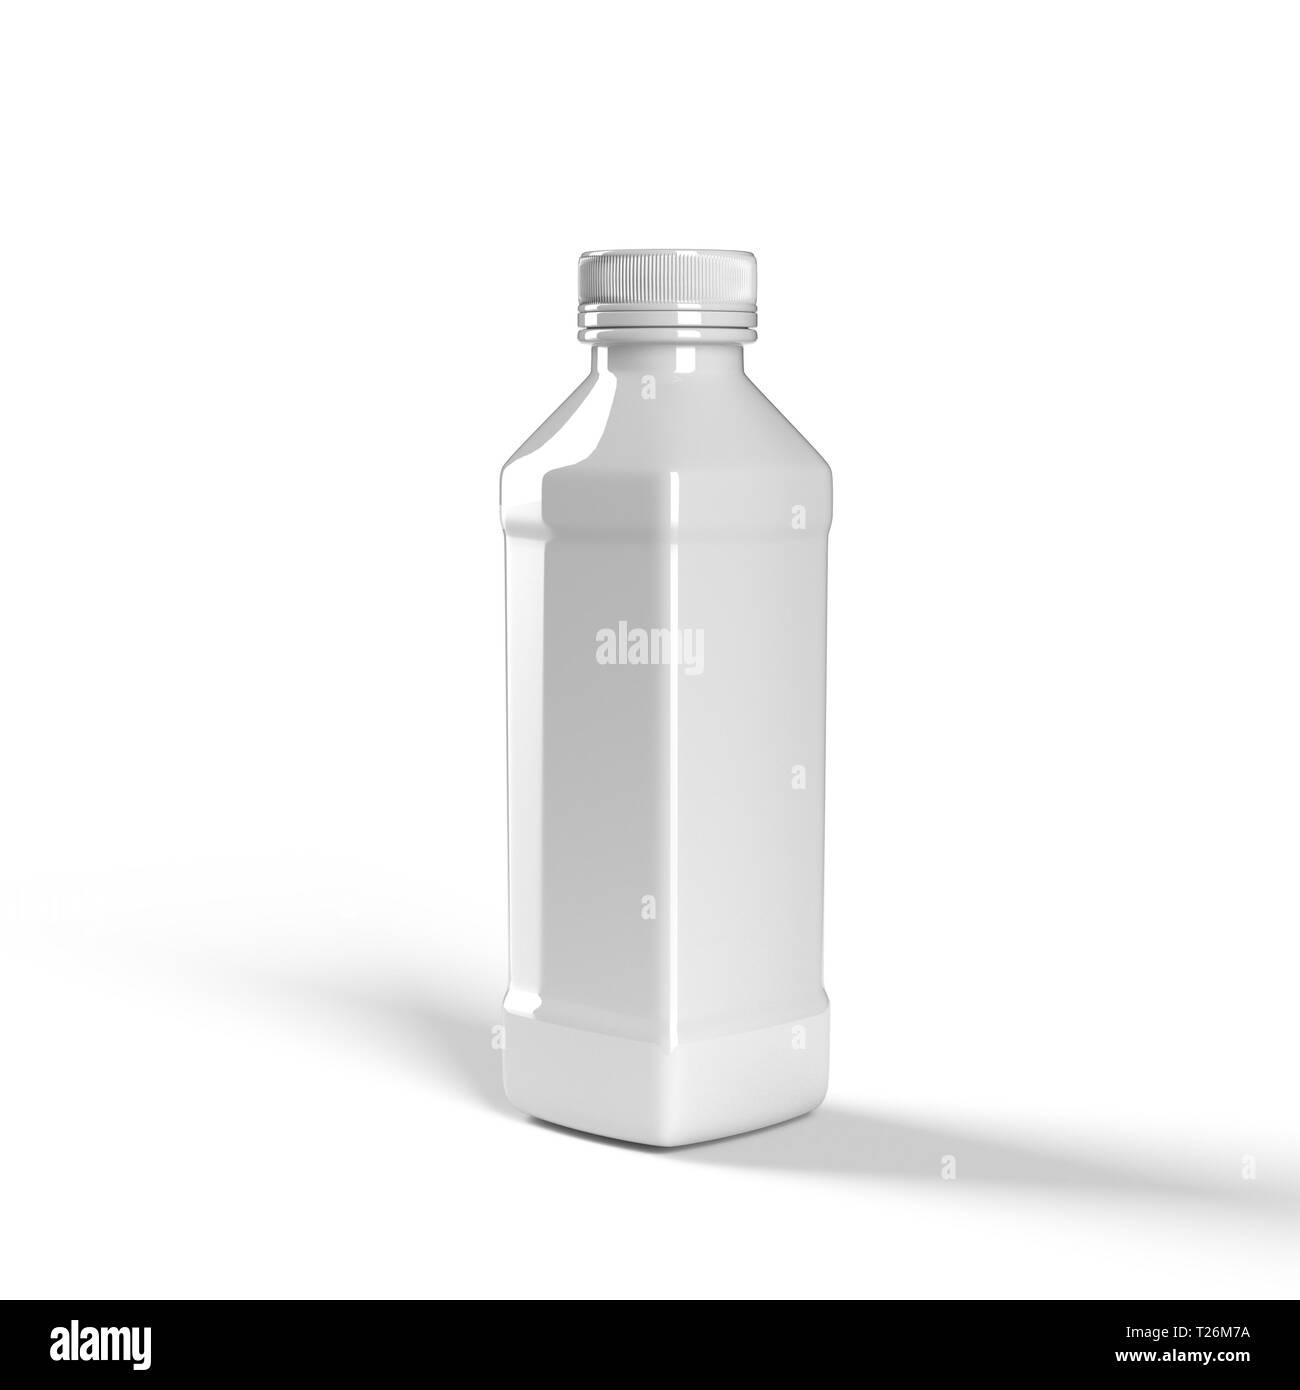 Download Realistic Bottle Mockup Isolated Packaging Template Easy To Customize 3d Rendering On White Background Stock Photo Alamy